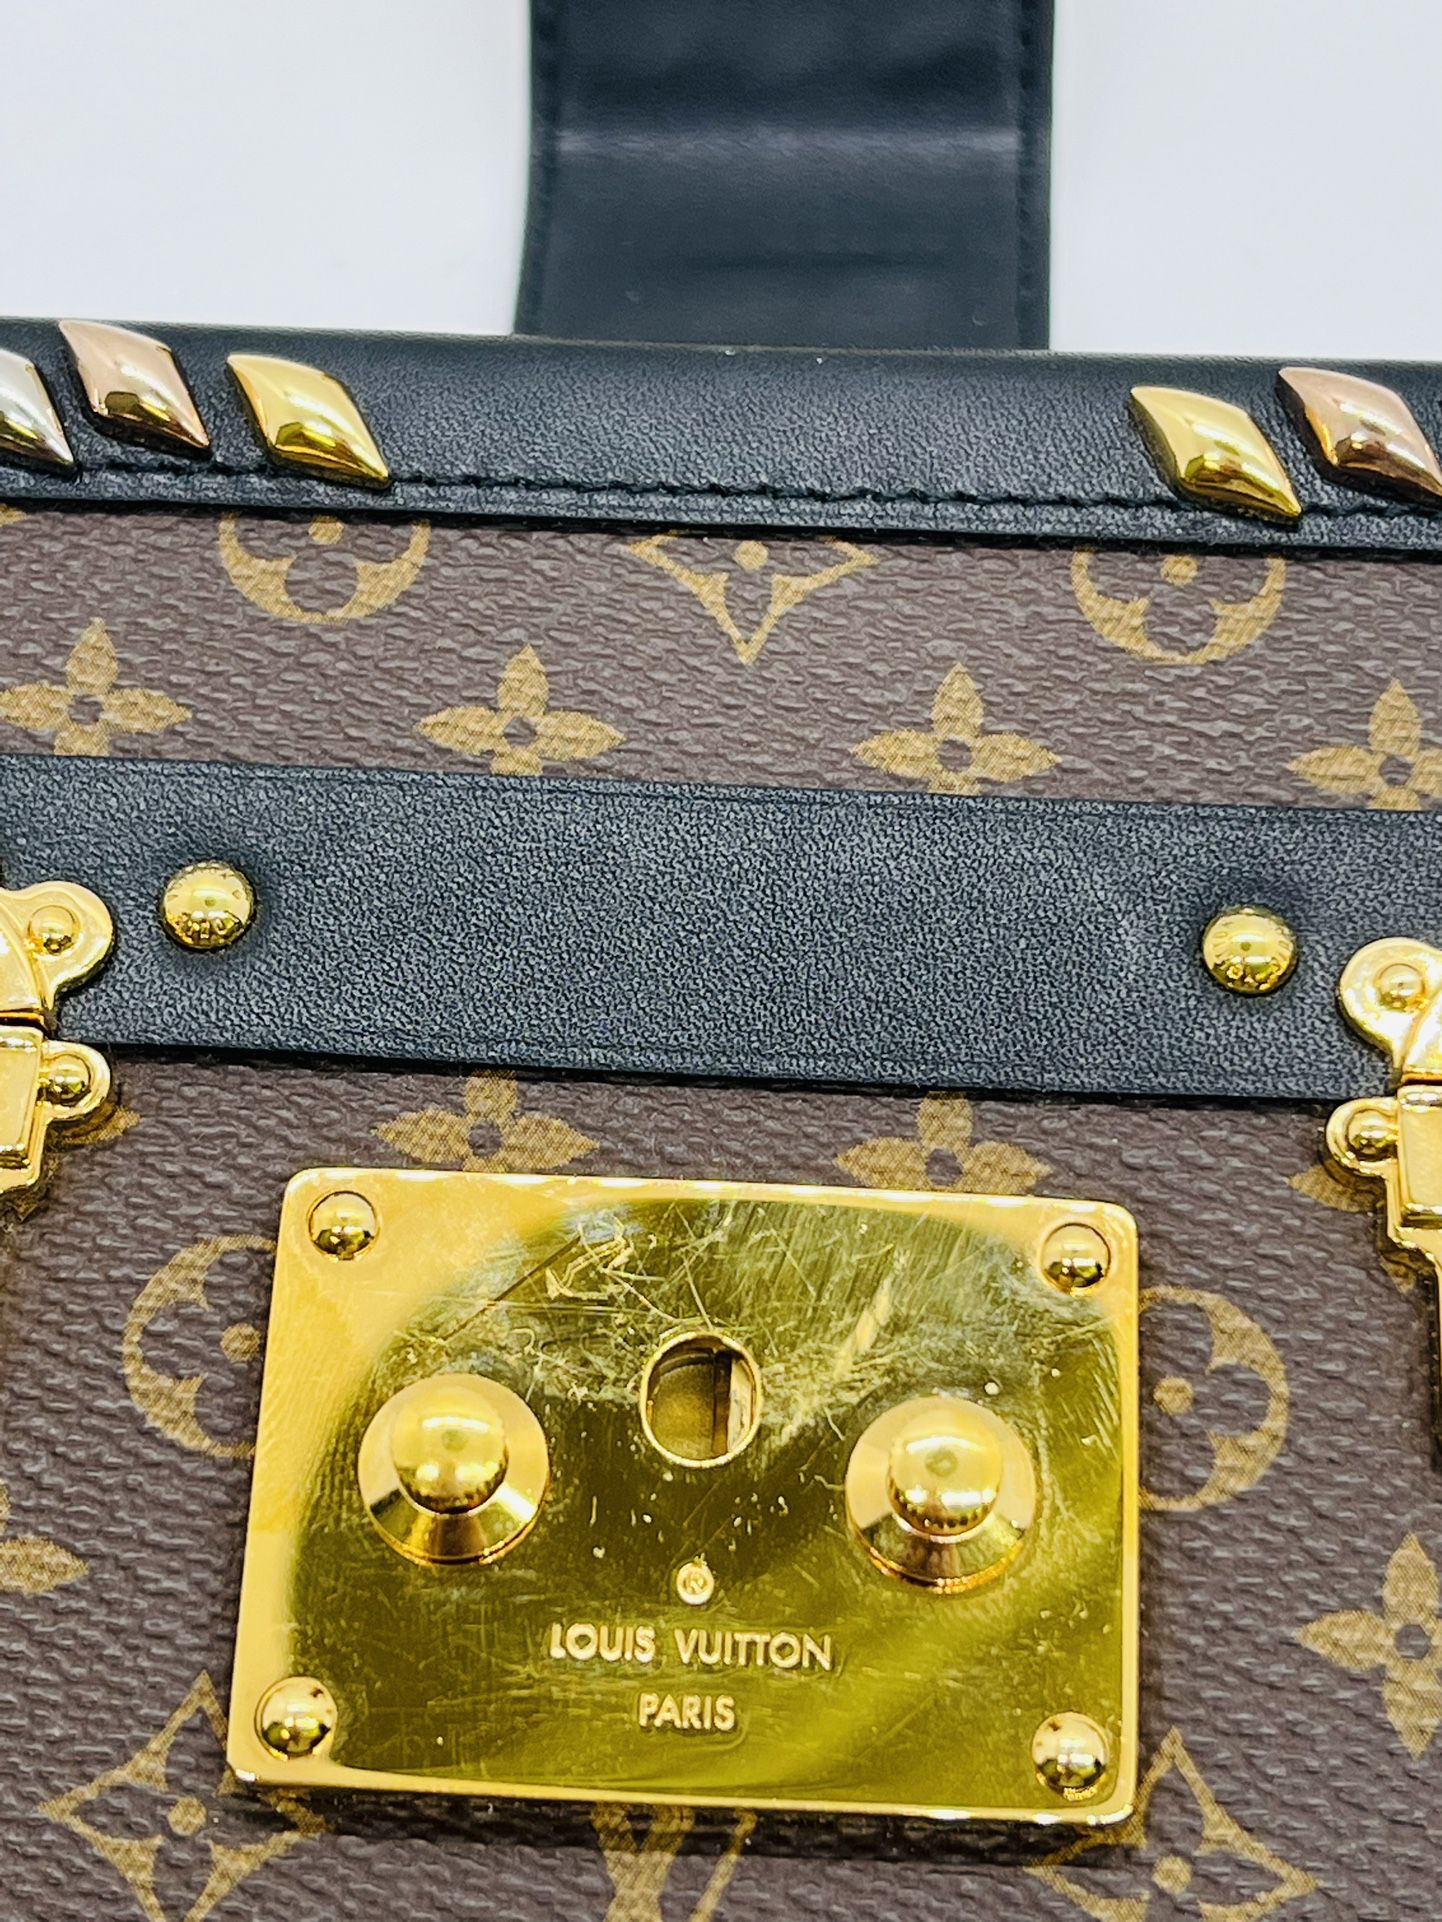 LOUIS VUITTON Monogram Petite Malle Black for Sale in Brightwaters, NY -  OfferUp